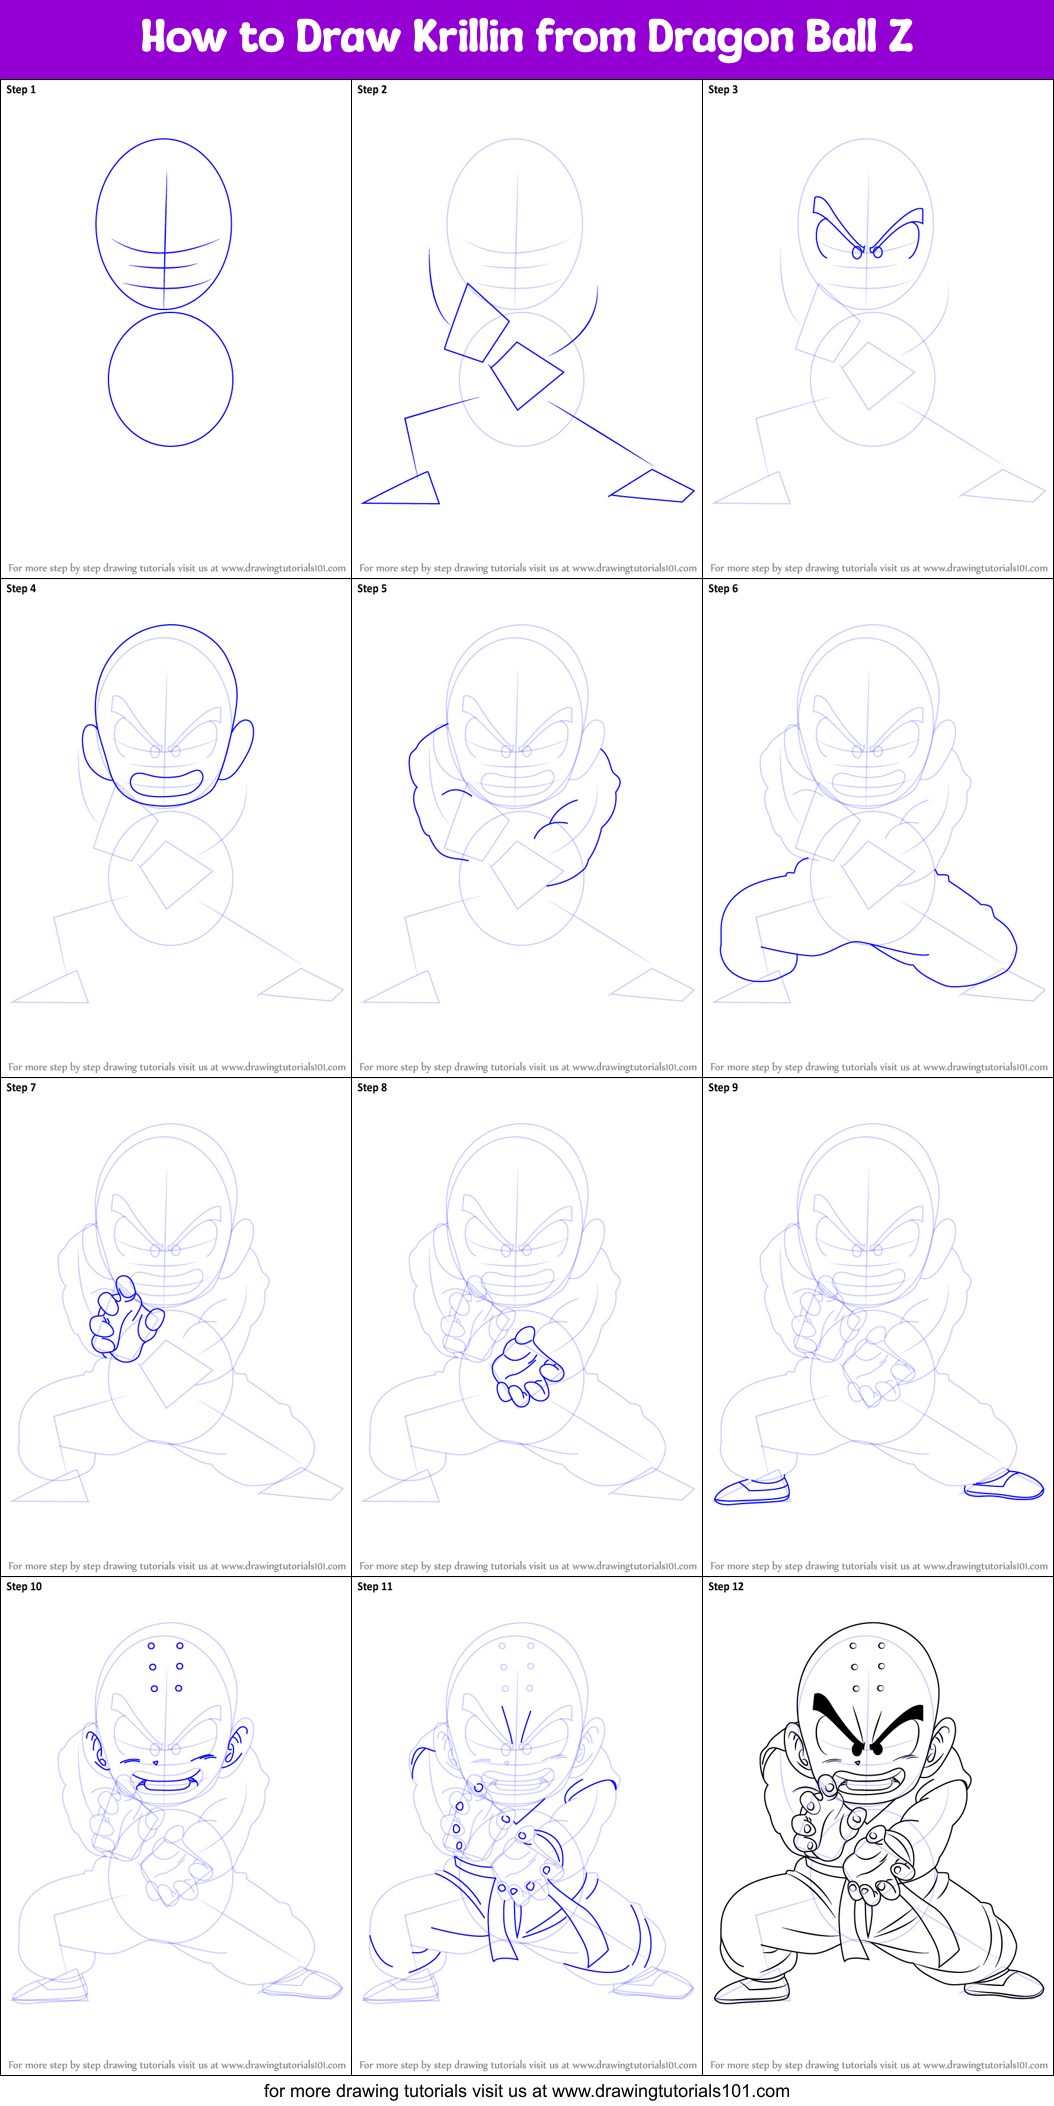 Download How to Draw Krillin from Dragon Ball Z printable step by step drawing sheet ...